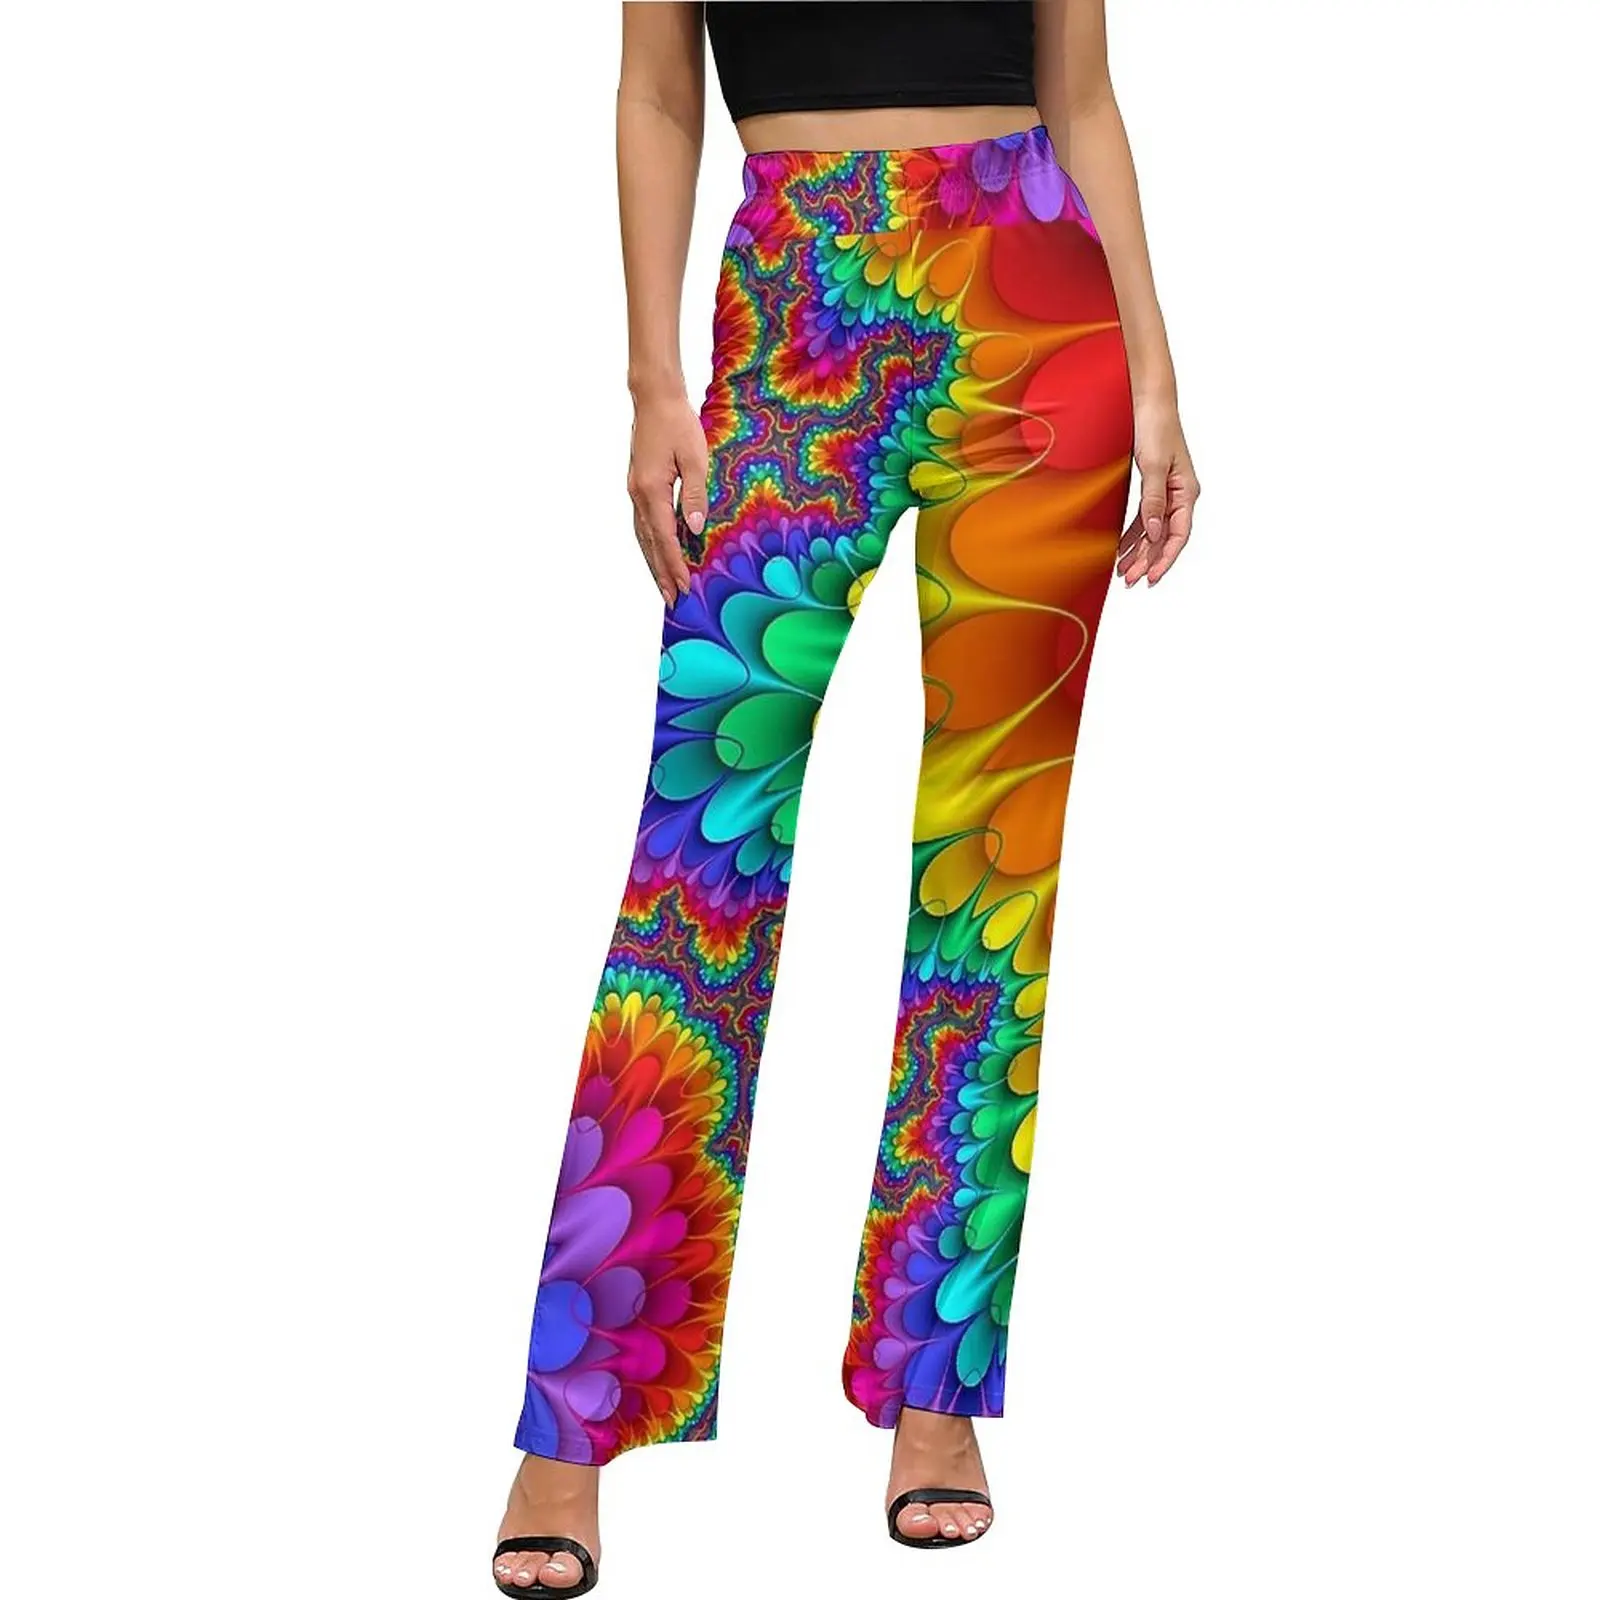 

Rainbow Splash Pants High Waist Psychedelic Print Harajuku Flared Pants Daily Office Graphic Oversize Trousers